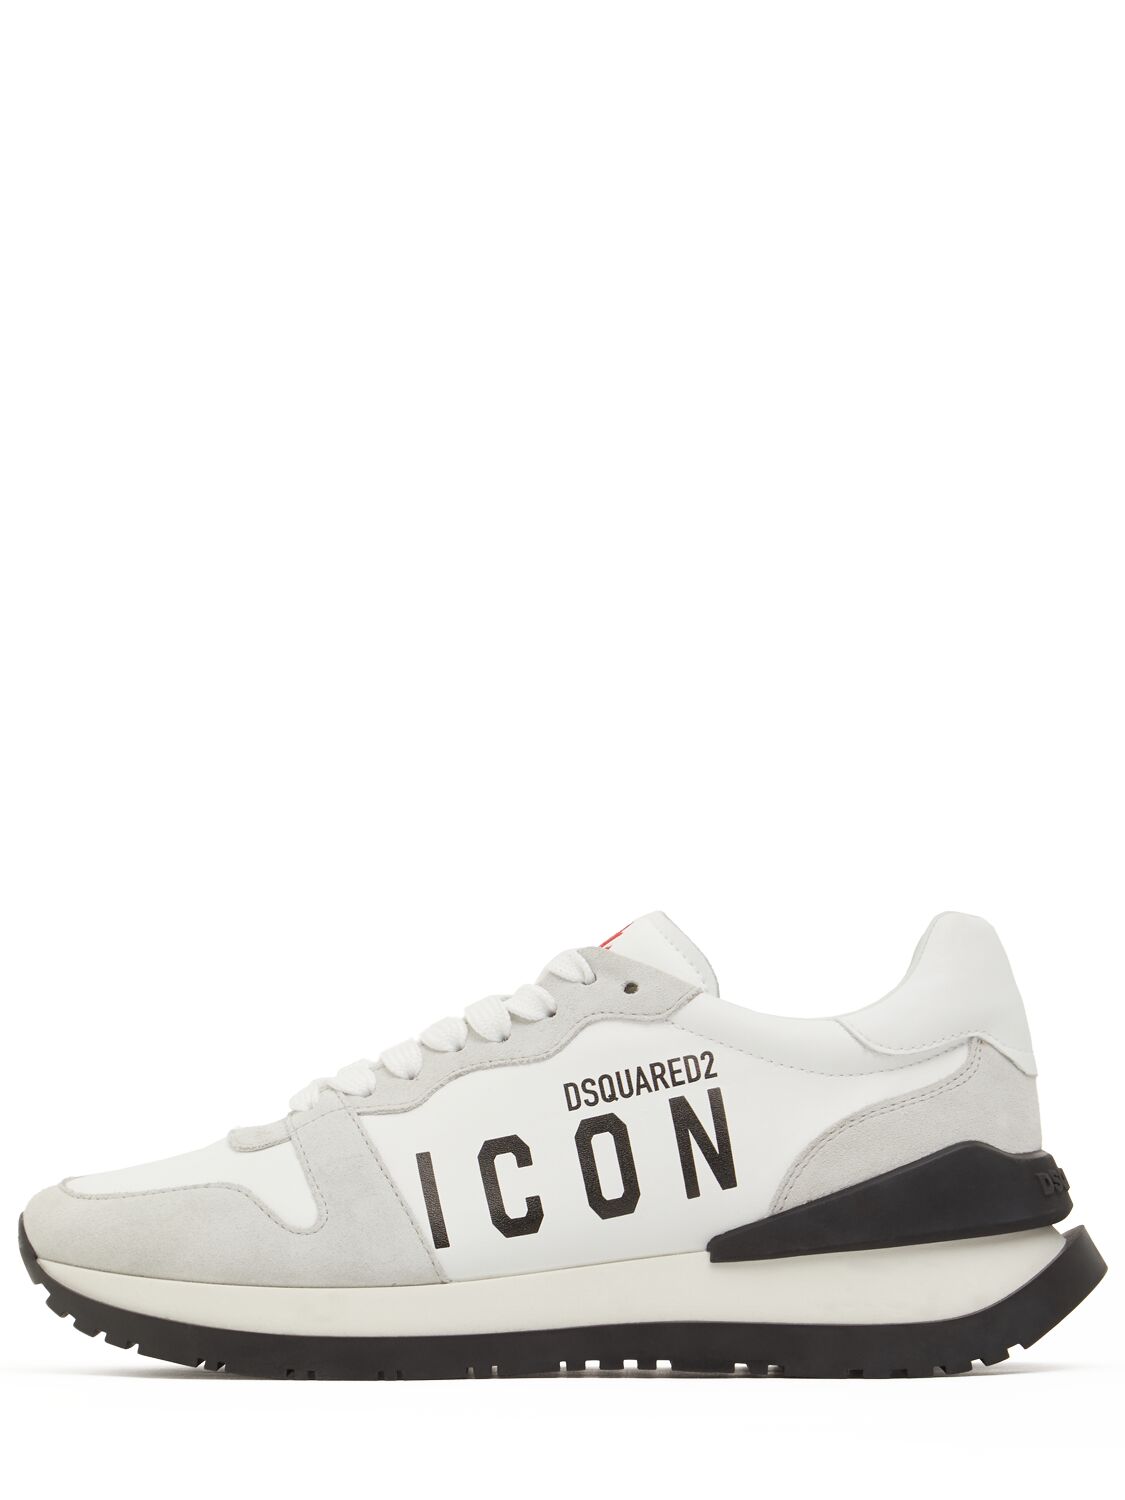 Dsquared2 Icon Logo Running Sneakers In White/black/red